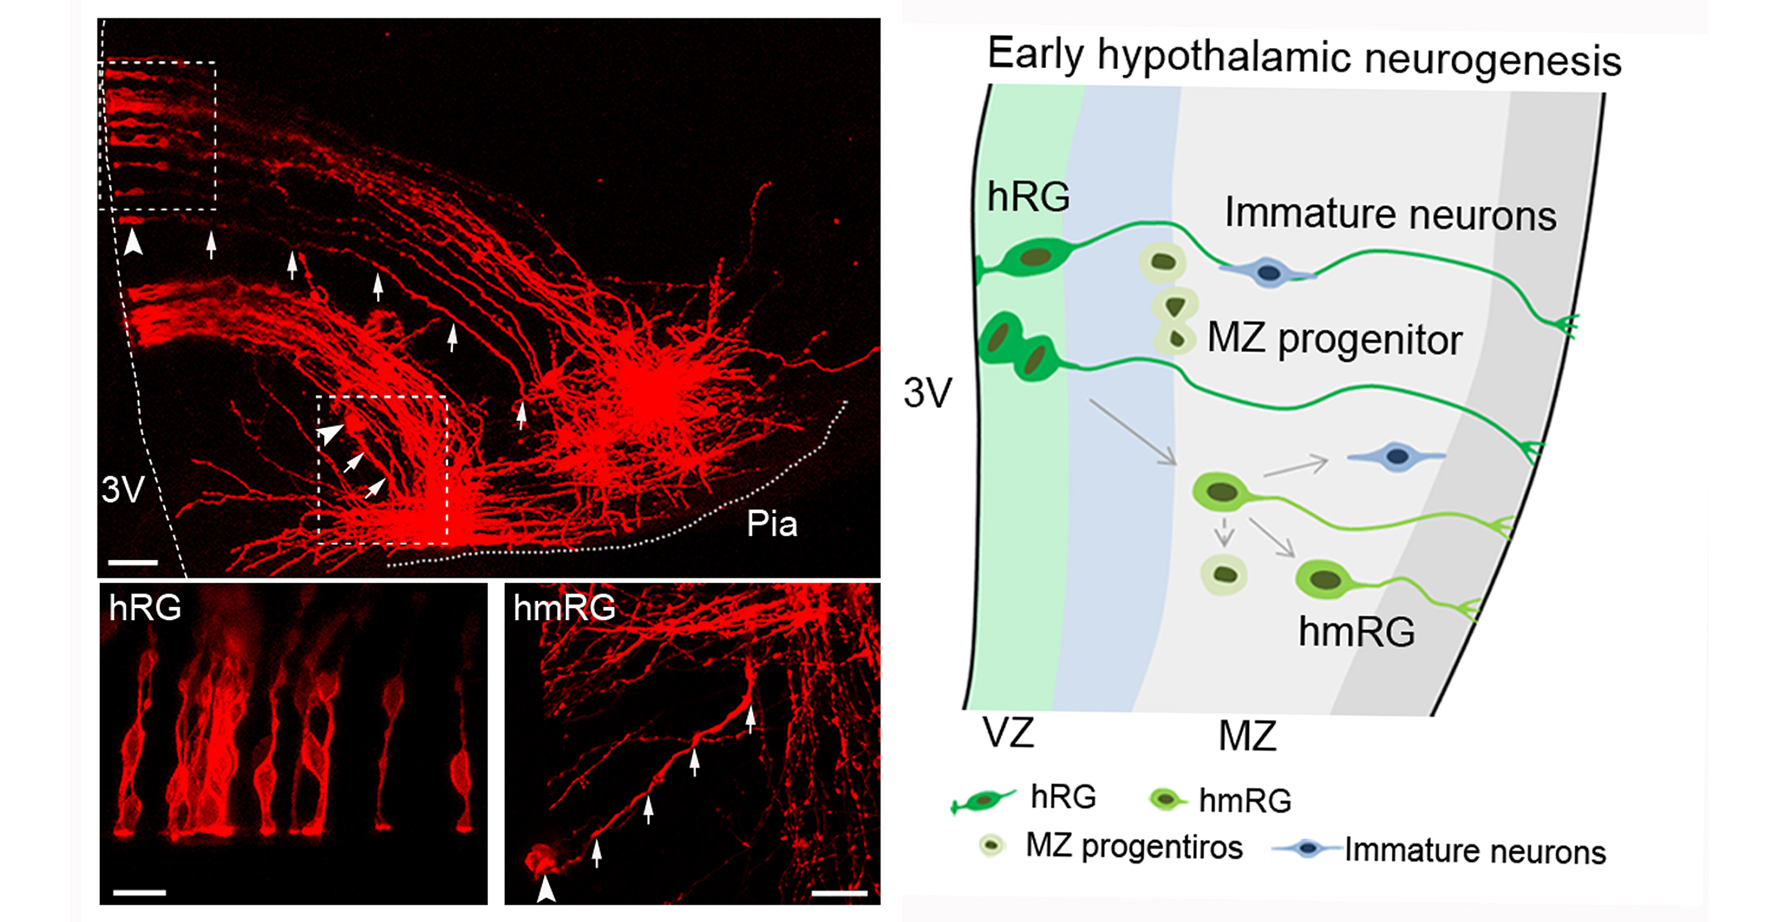 Cellular and molecular properties of neural progenitors in the developing mammalian hypothalamus.